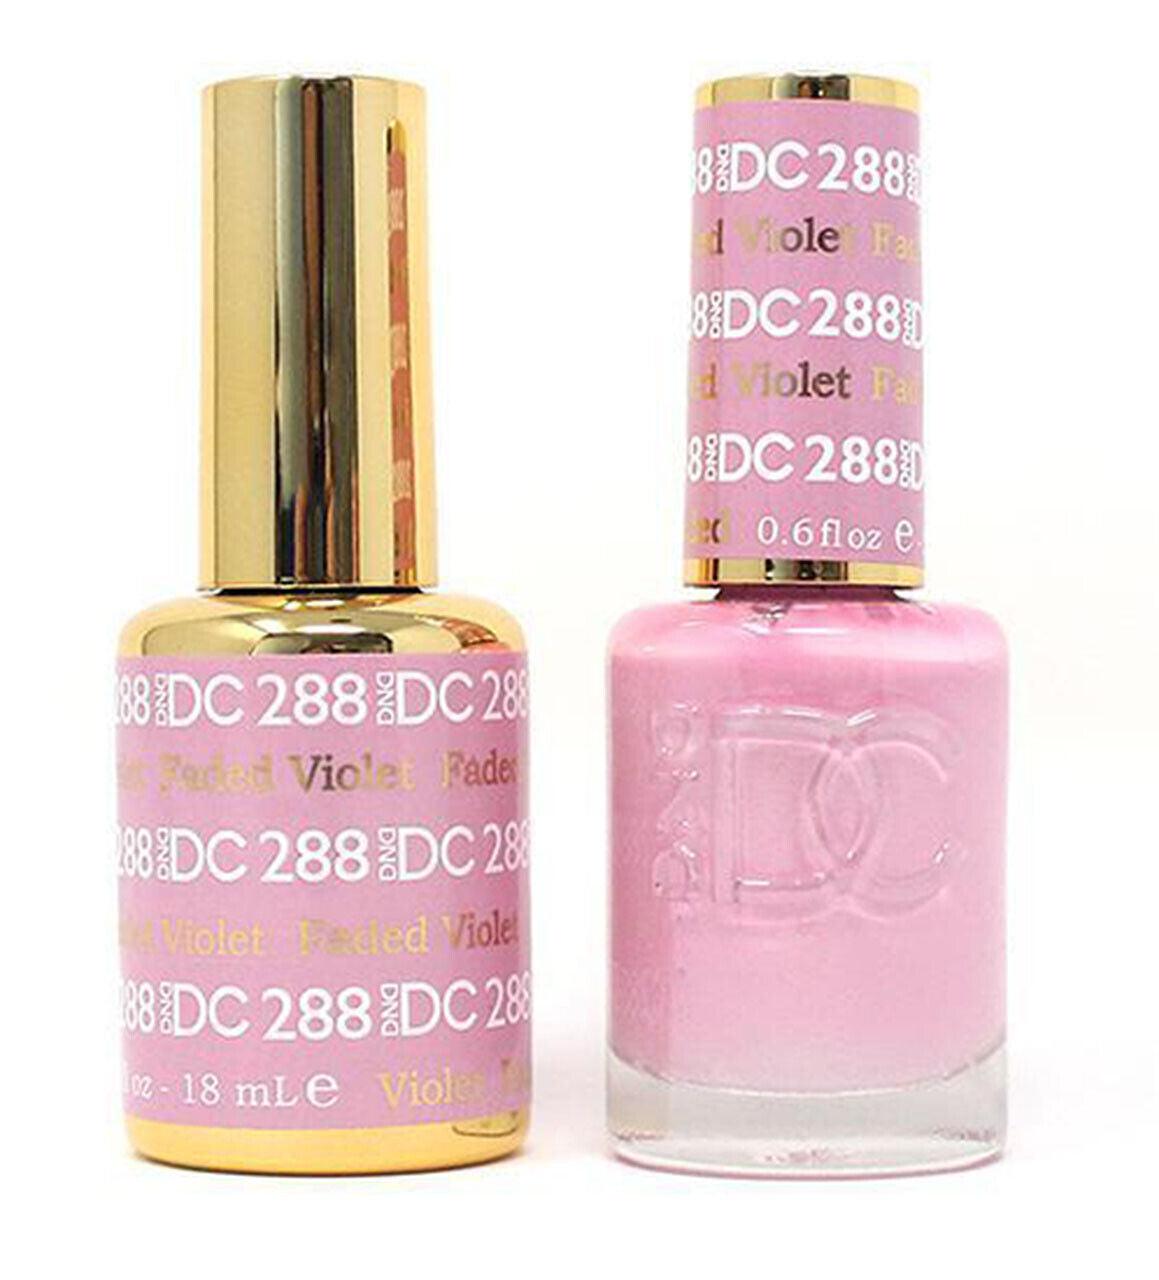 DND DC - Gel Polish & Matching Nail Lacquer Set - #288 FADED VIOLET